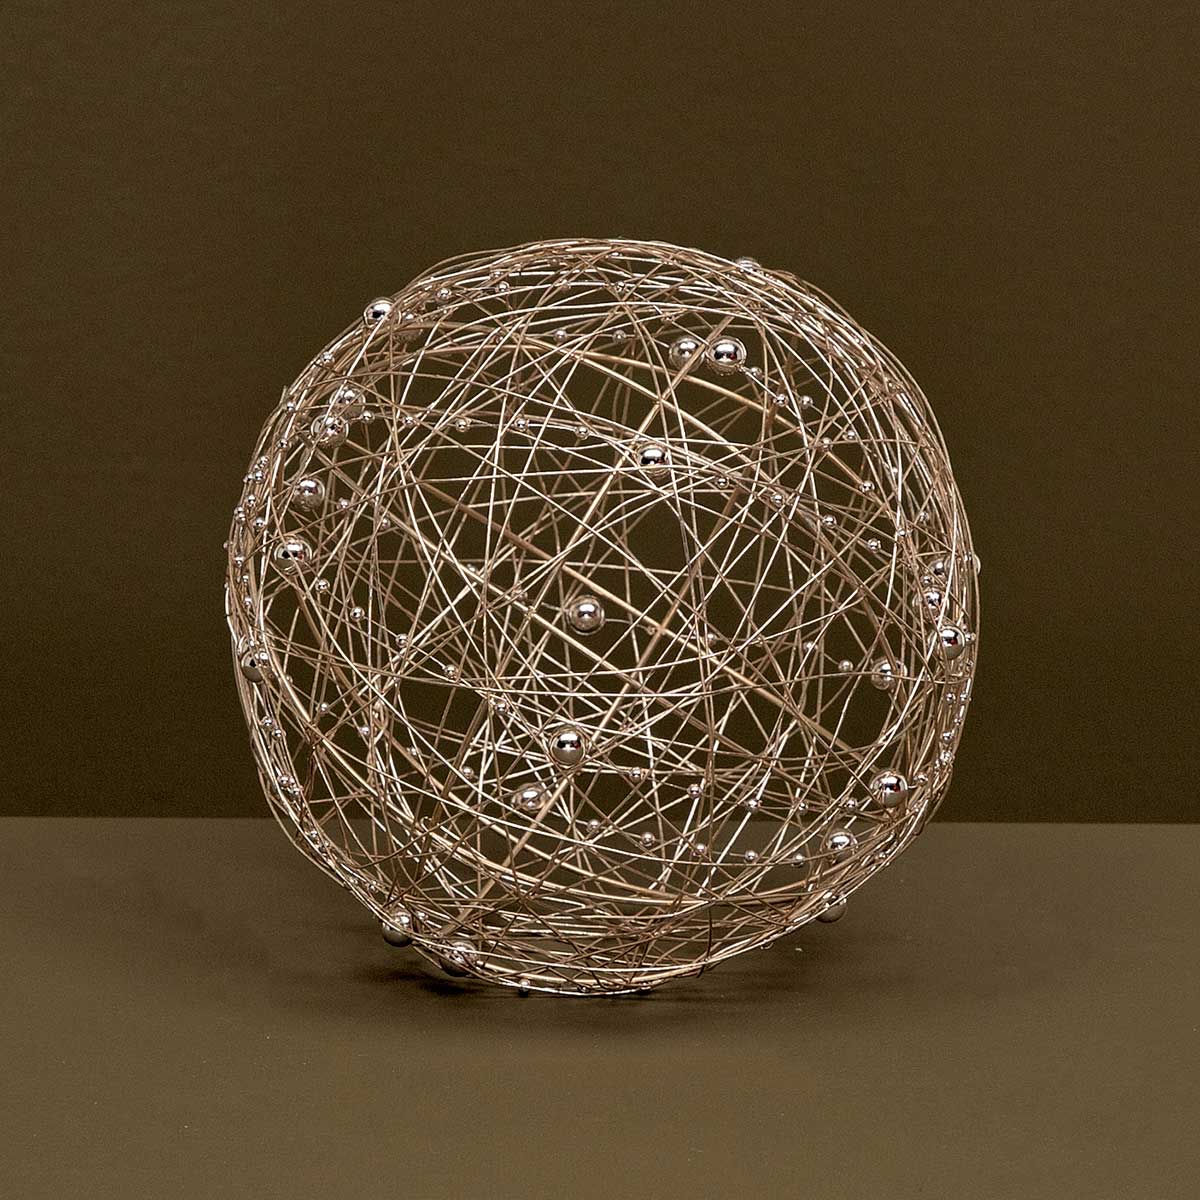 DECORATIVE WIRE BALL CHAMPAGNE WITH BEADS MEDIUM 5.5"